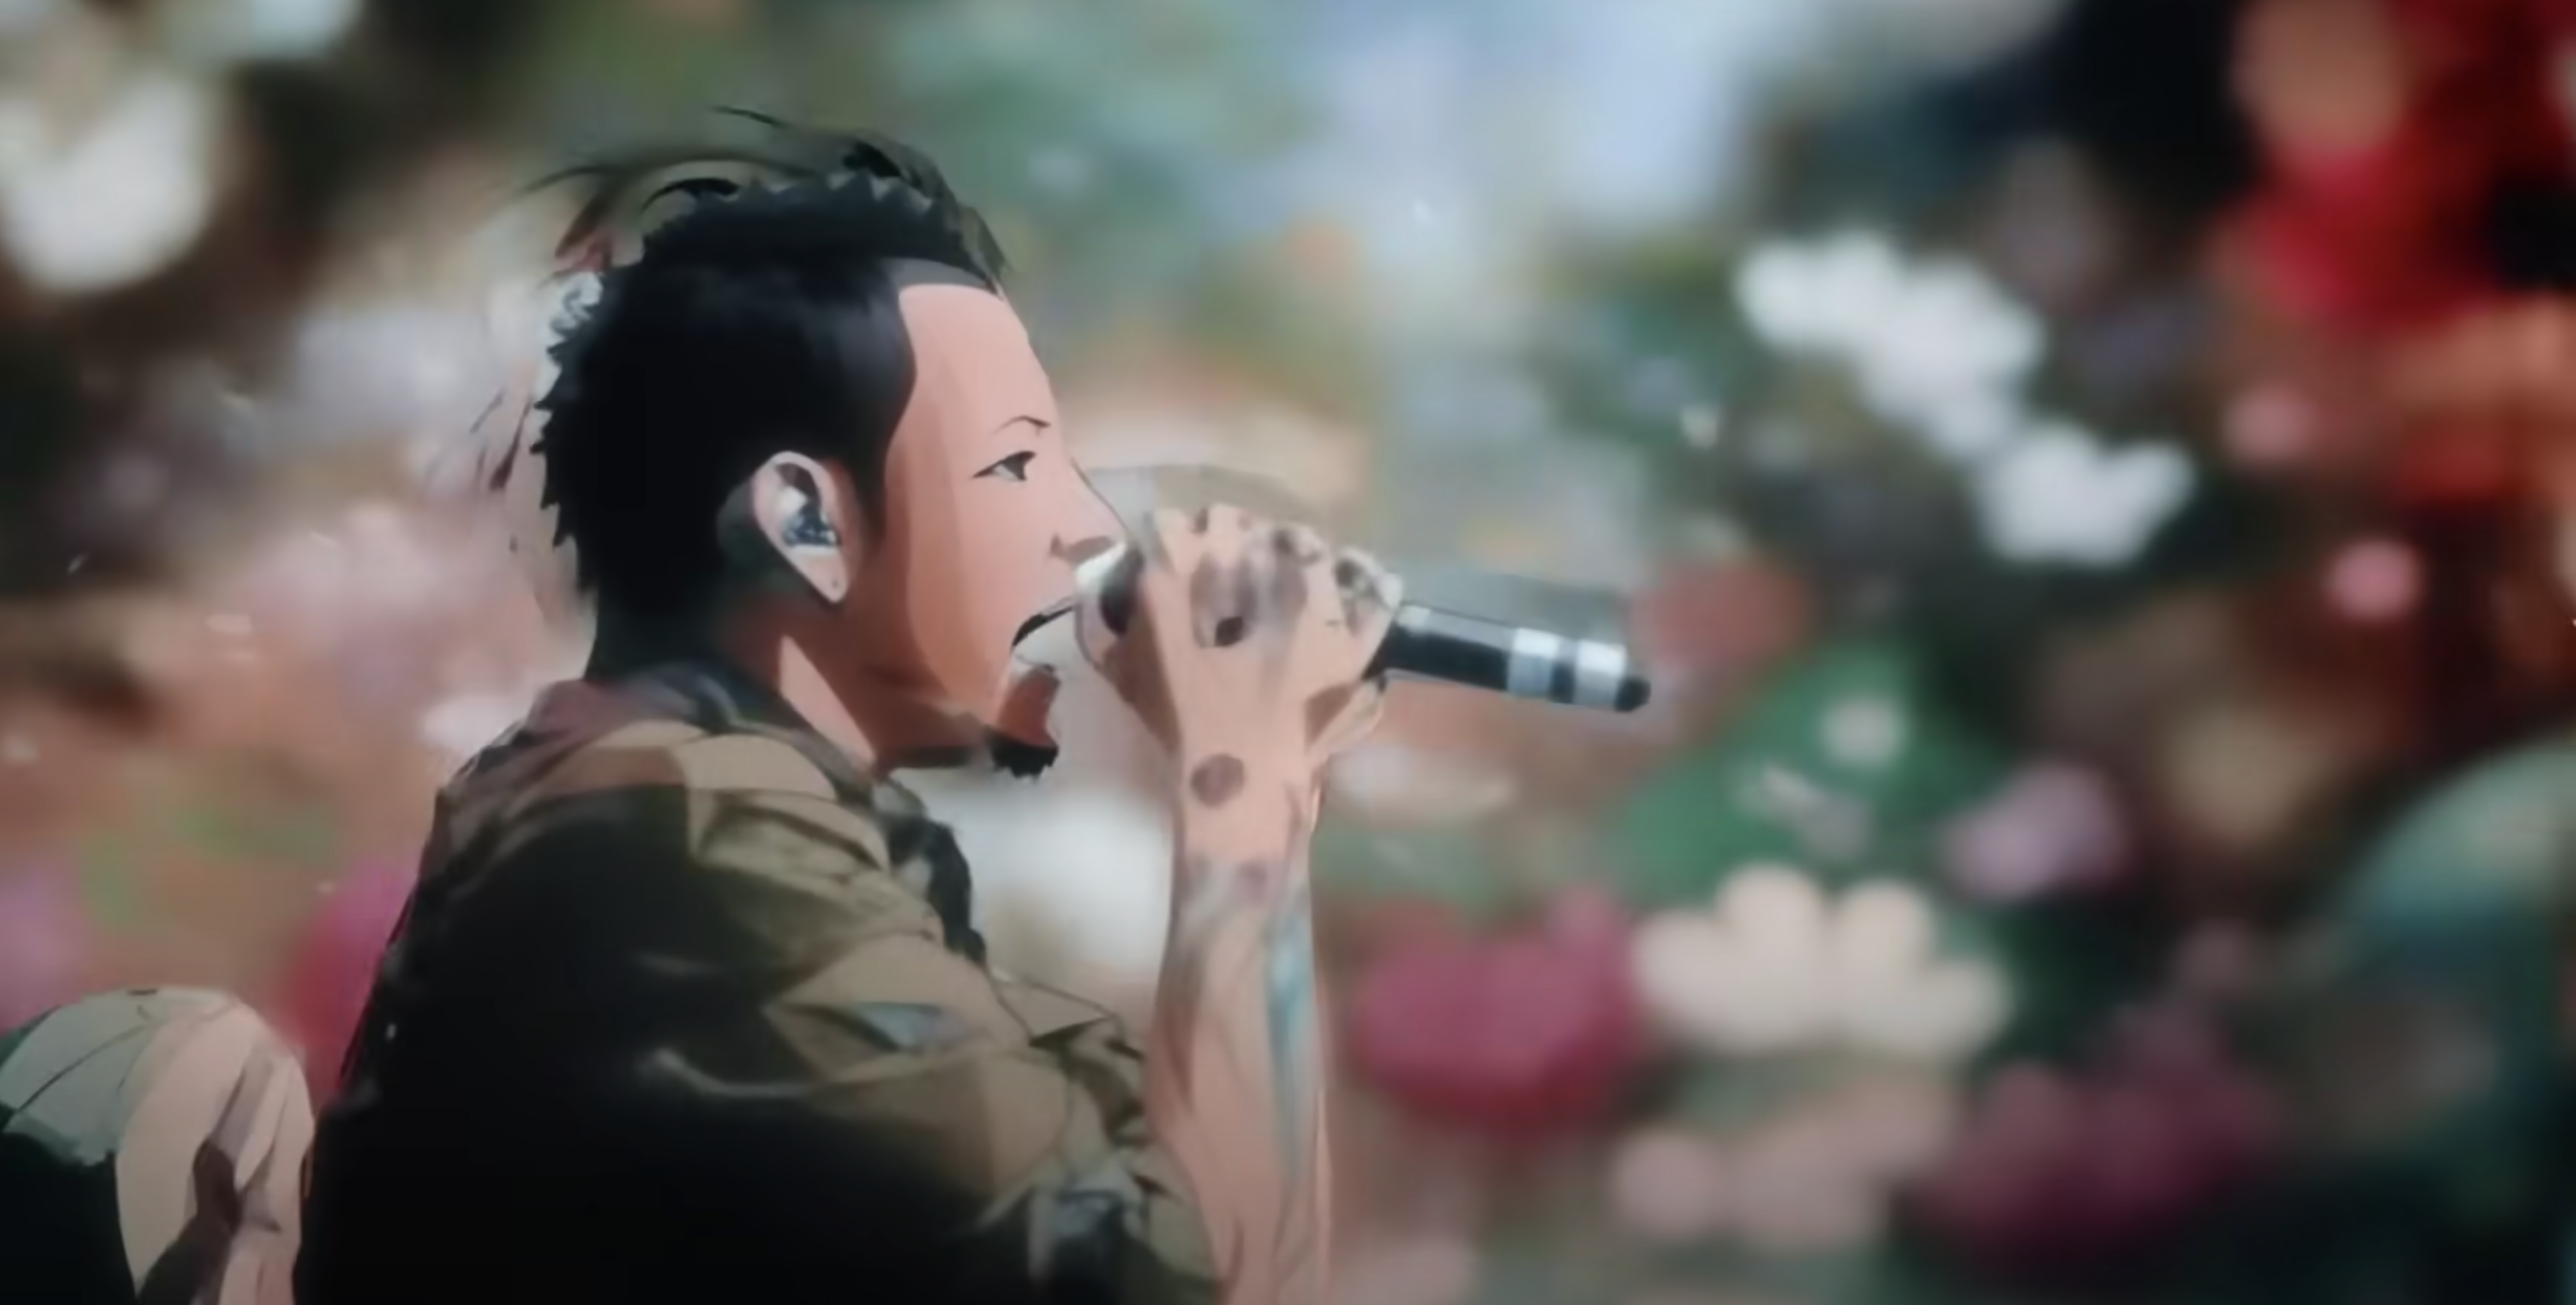 Check Out Another Unreleased LINKIN PARK Song Called 'Fighting Myself',  From 'Meteora' 20th-Anniversary Box Set